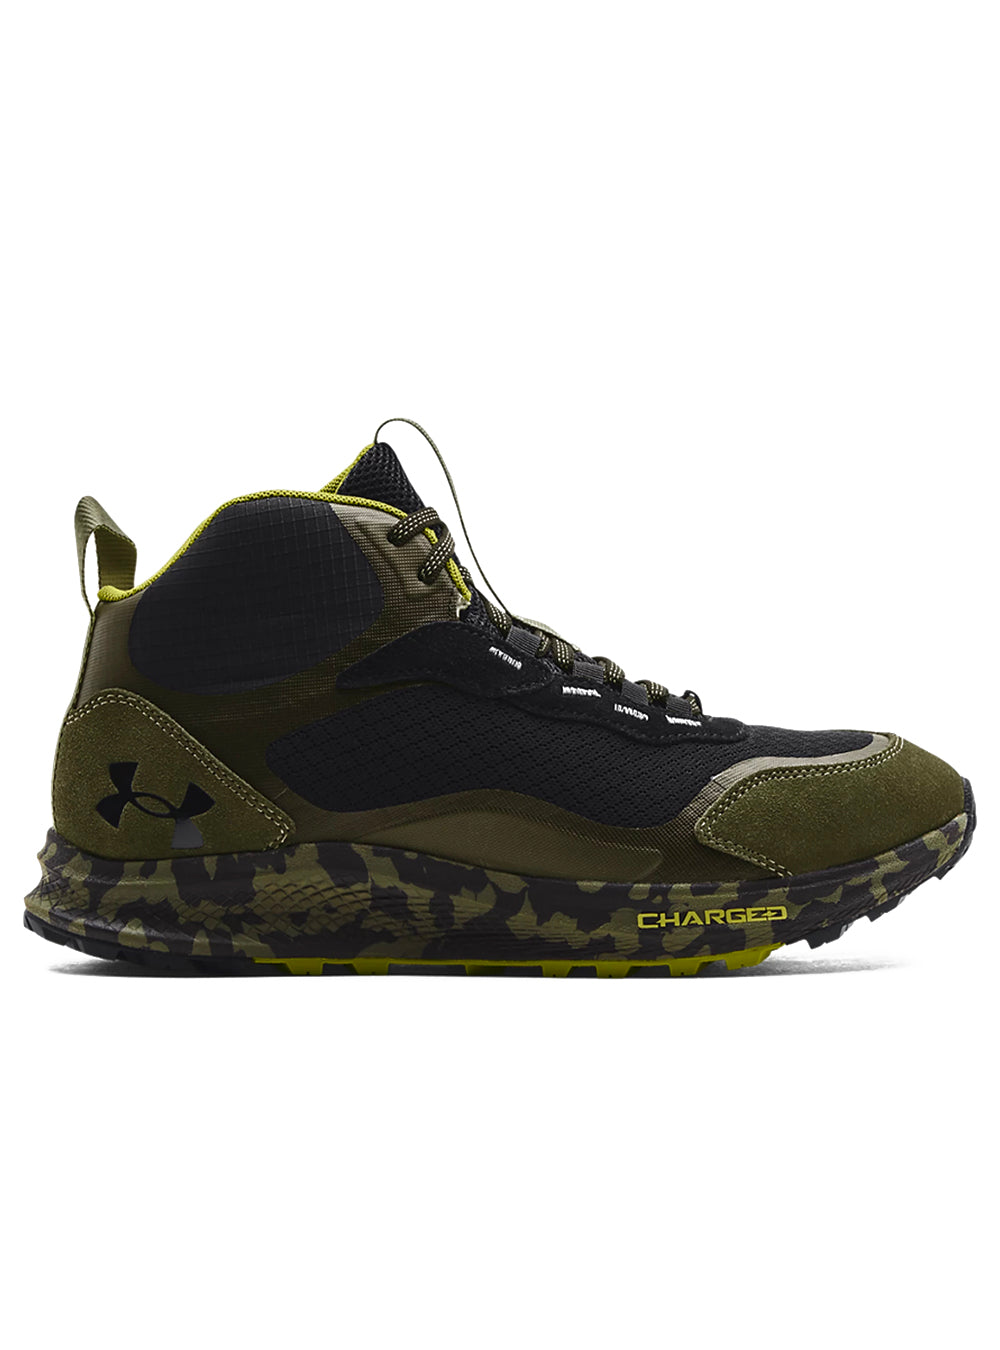 Under Armour Charged Bandit Trek 2 Print Hiking Shoes